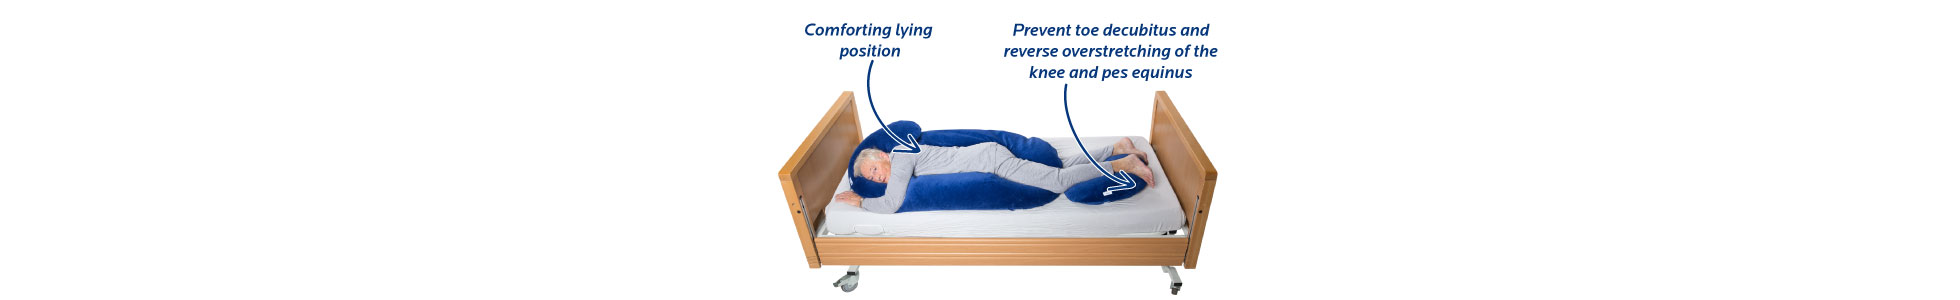 REBACARE® Prone position instructions